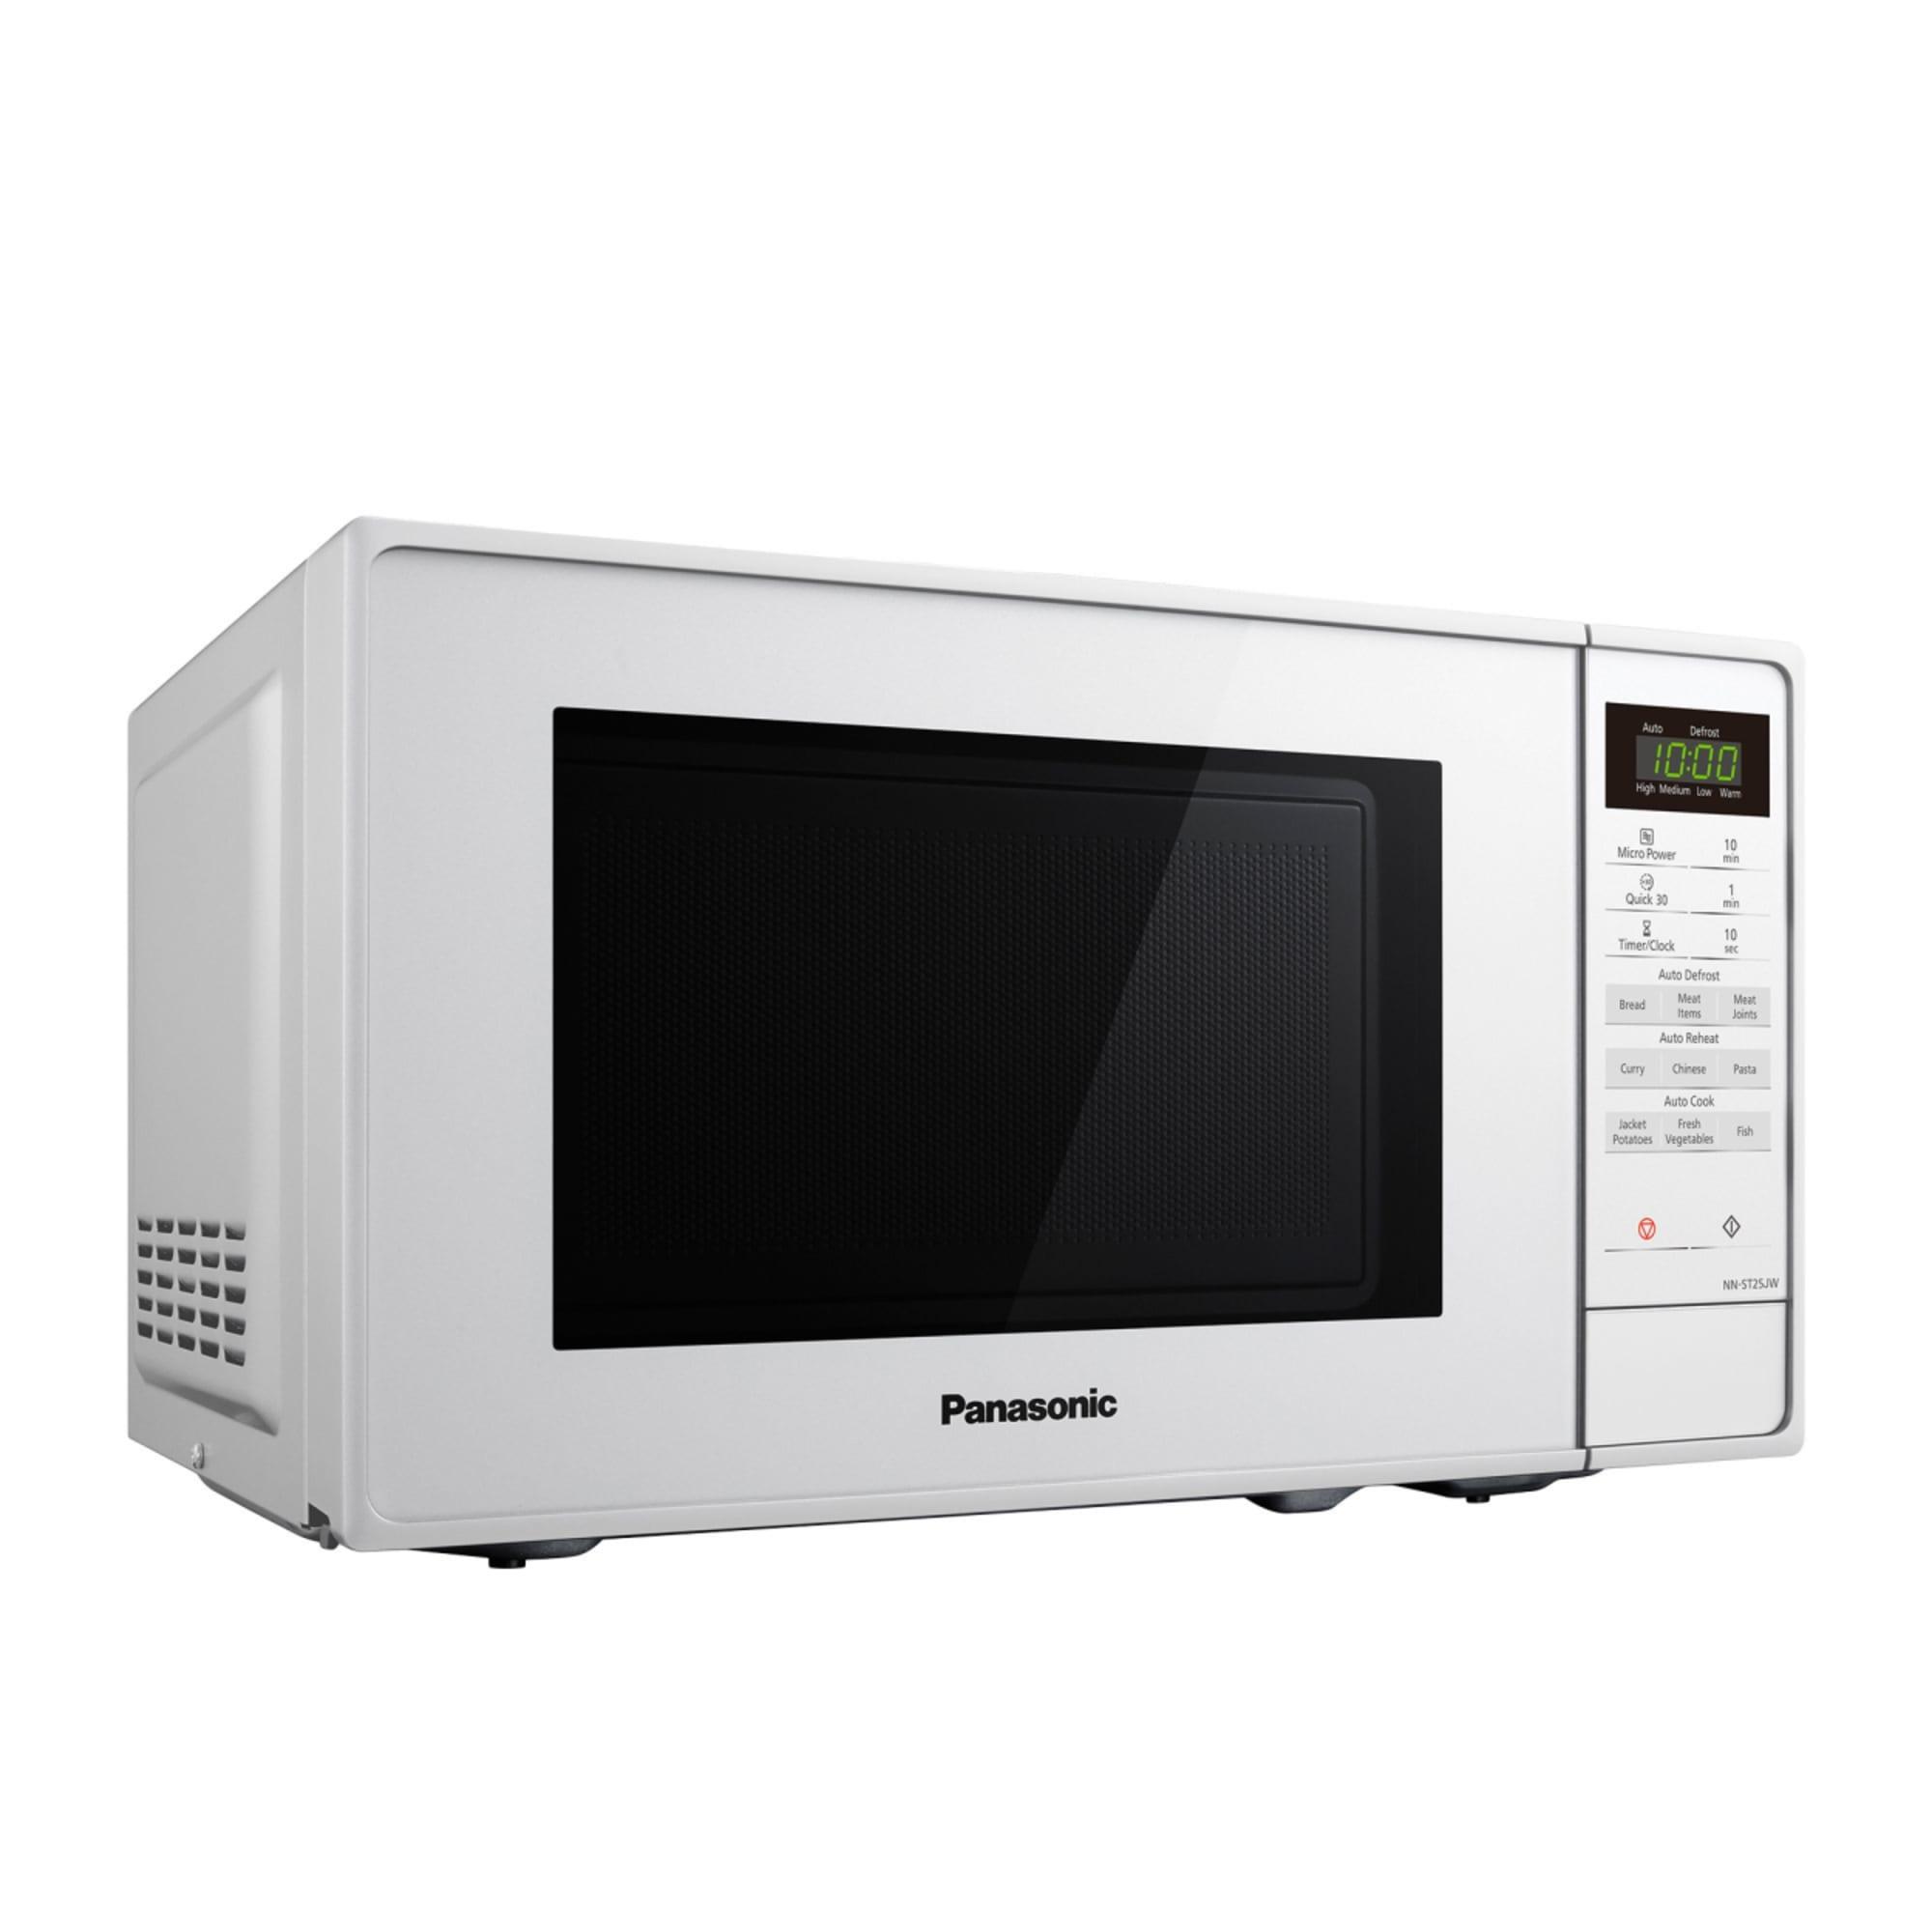 Panasonic Defrost Microwave Oven 20L White Image 3